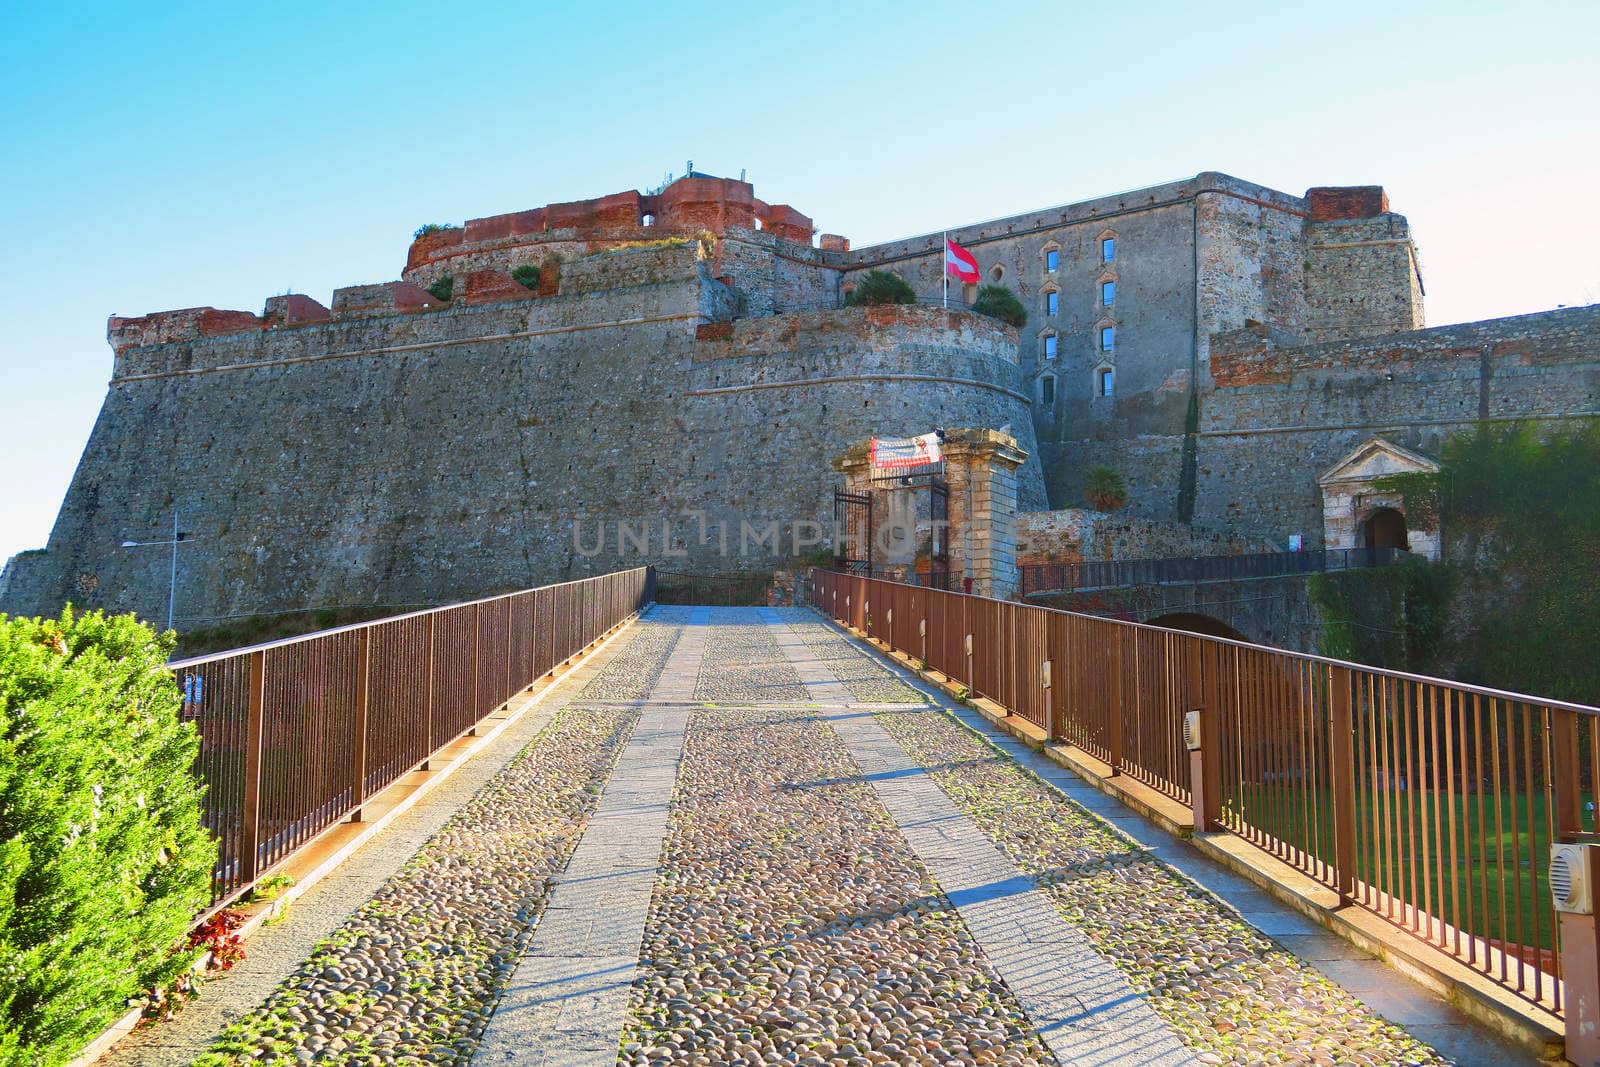 View of access to the Priamar fortress in Savona,Italy,built in 1542 by the Republic of Genoa. It is situated on a hill above the sea and was the main fortress of the Genoese republic in western Liguria.